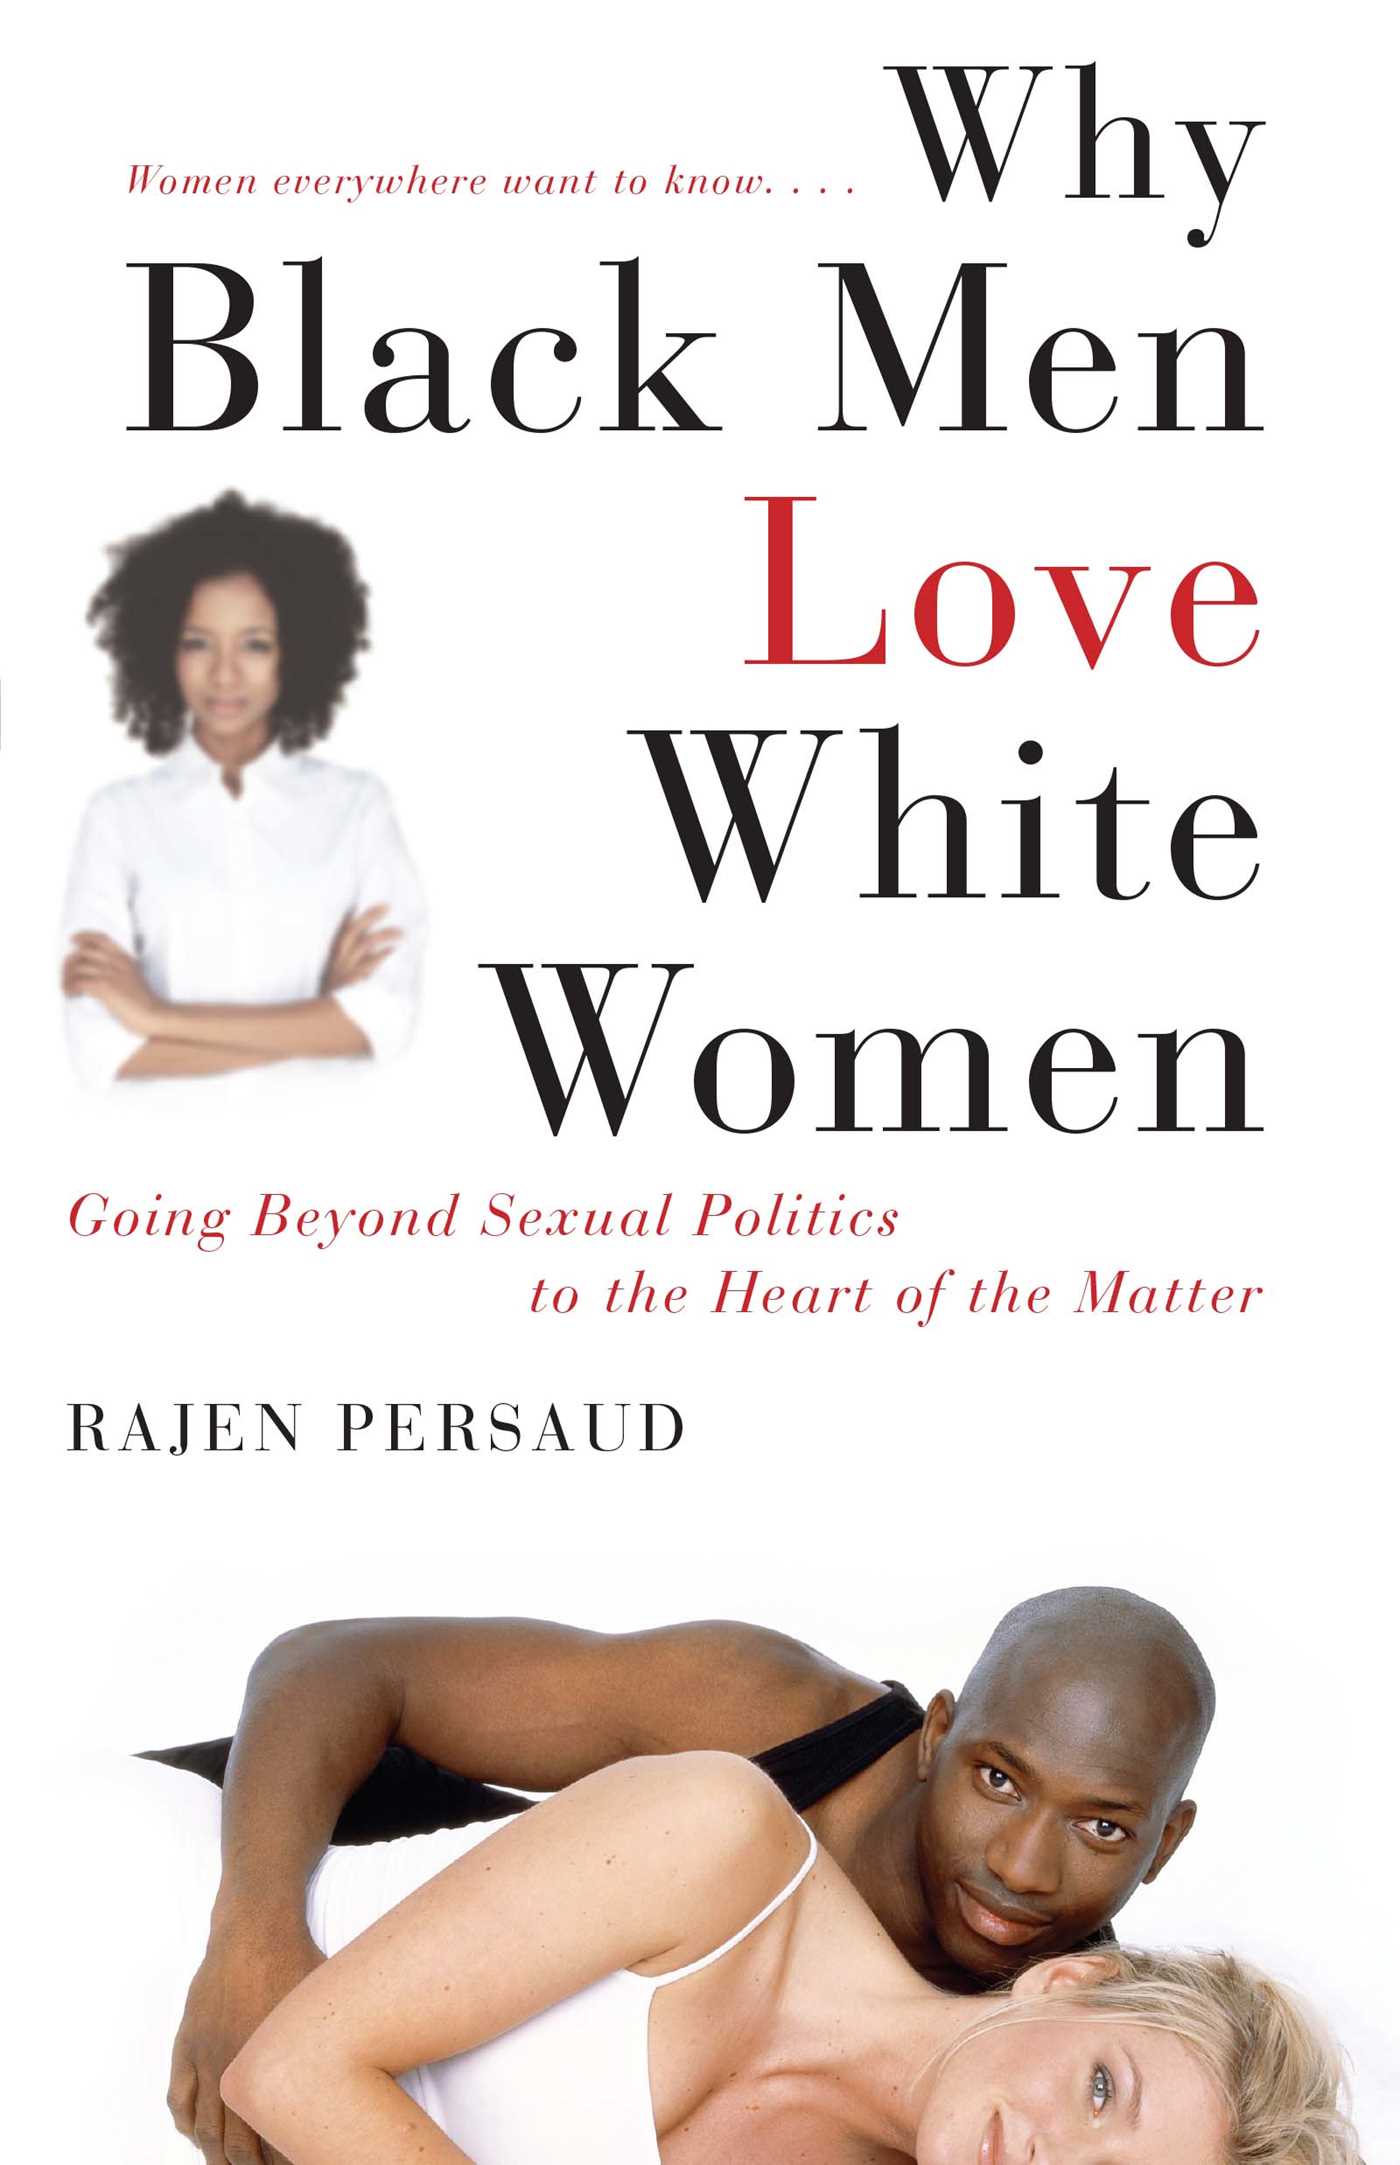 Why do so many high-profile black men date and marry the most ordinary whit...